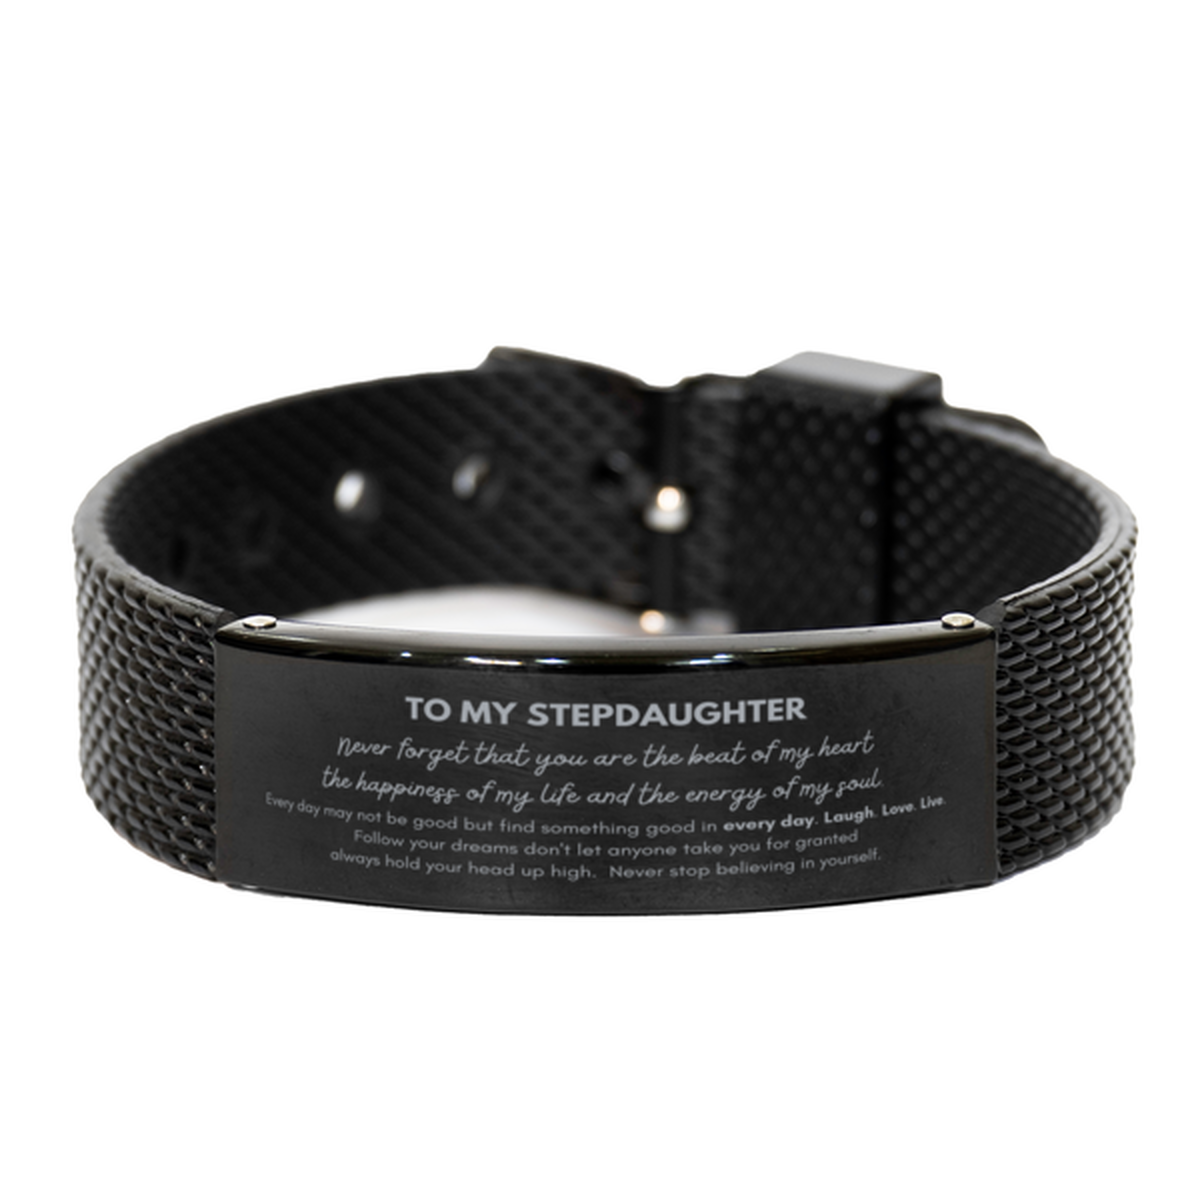 To My Stepdaughter Bracelet Gifts, Christmas Stepdaughter Black Shark Mesh Bracelet Present, Birthday Unique Motivational For Stepdaughter, To My Stepdaughter Never forget that you are the beat of my heart the happiness of my life and the energy of my sou